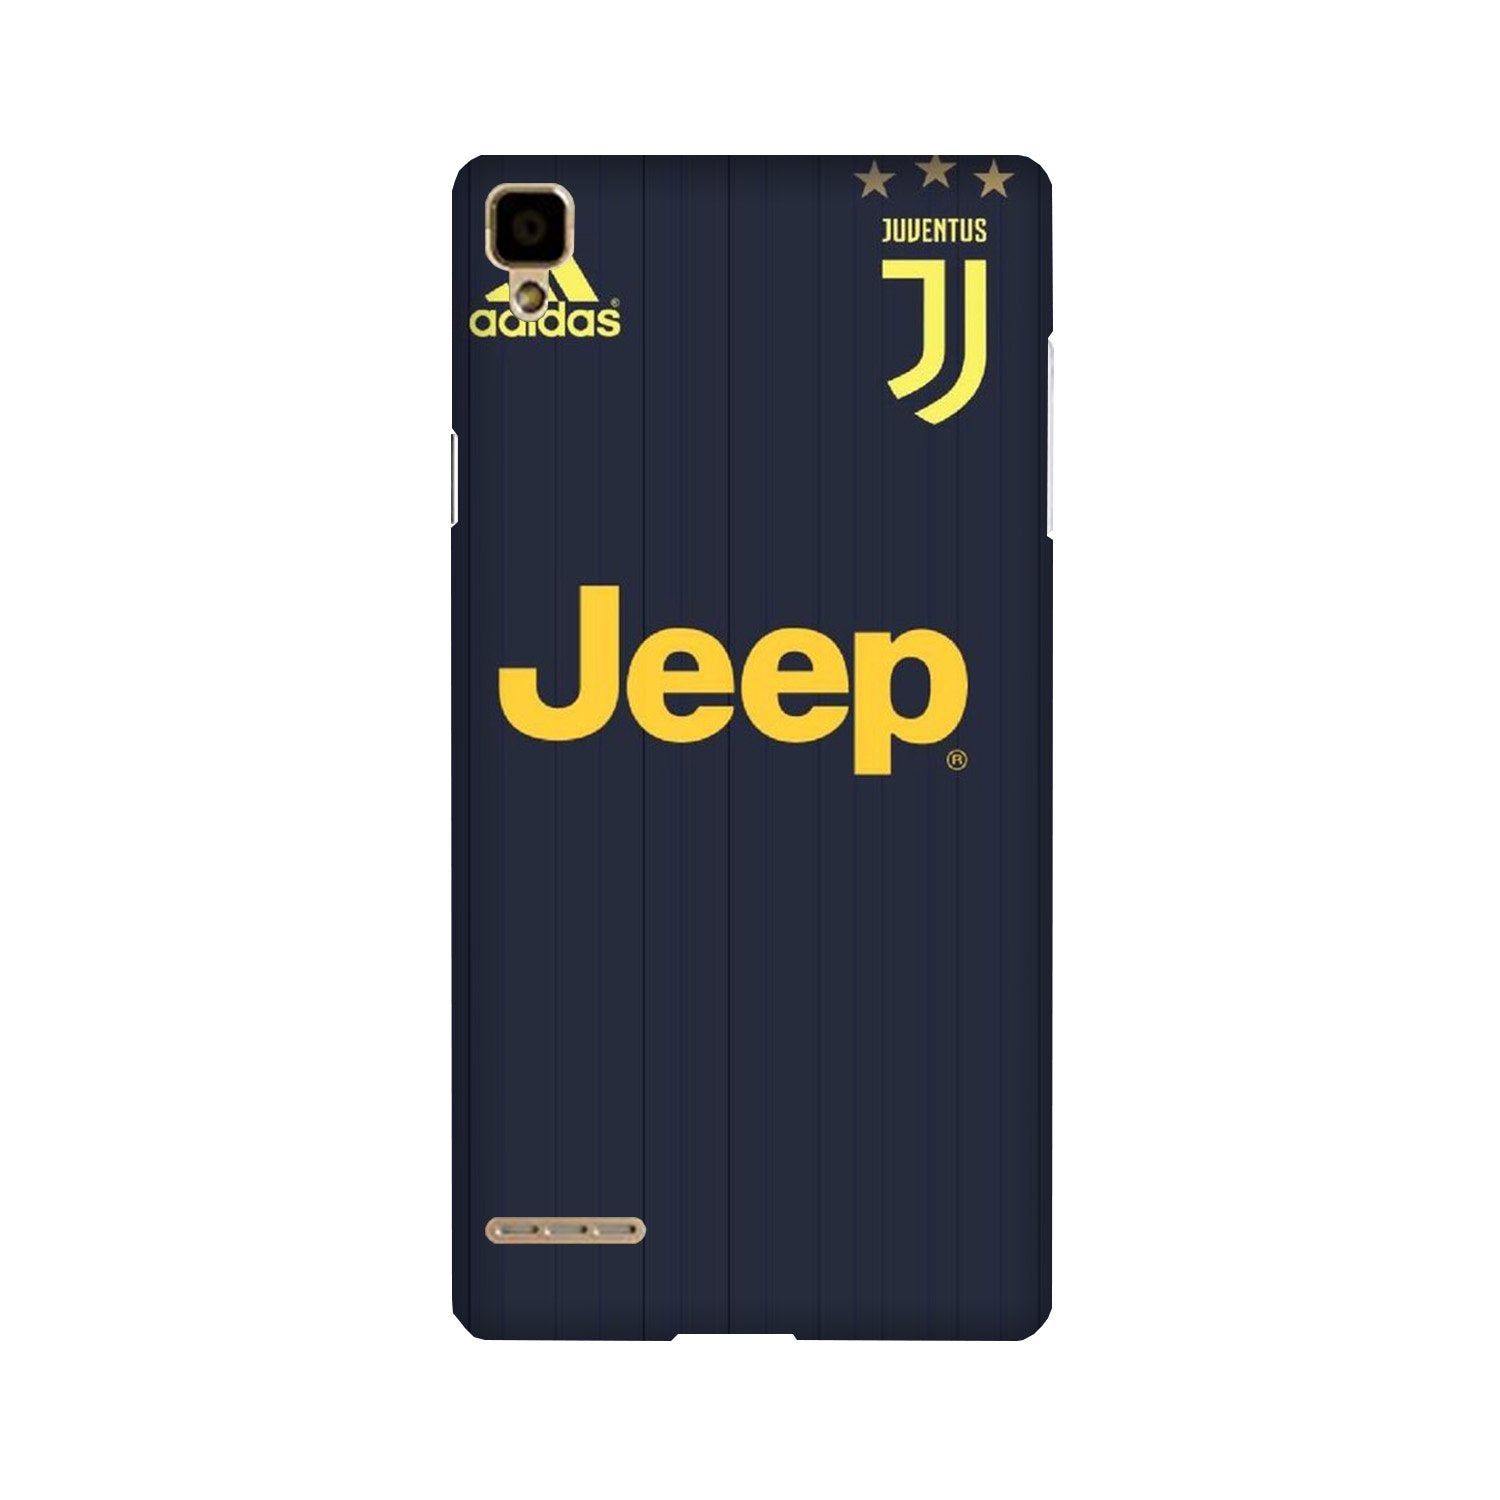 Jeep Juventus Case for Oppo F1(Design - 161)